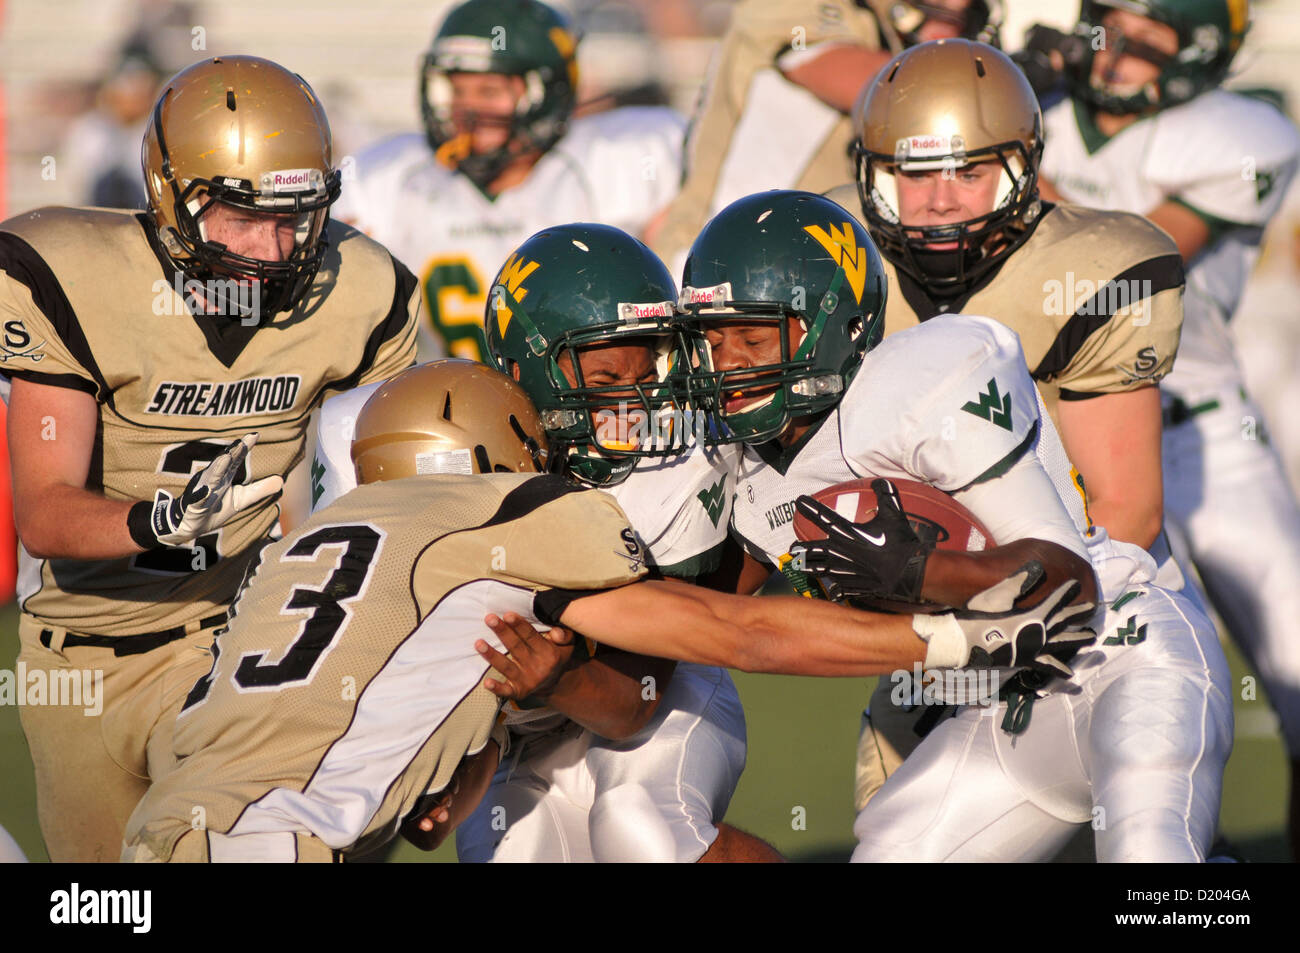 Football running back along with a blocker halted by a tackler during a high school football game. USA. Stock Photo